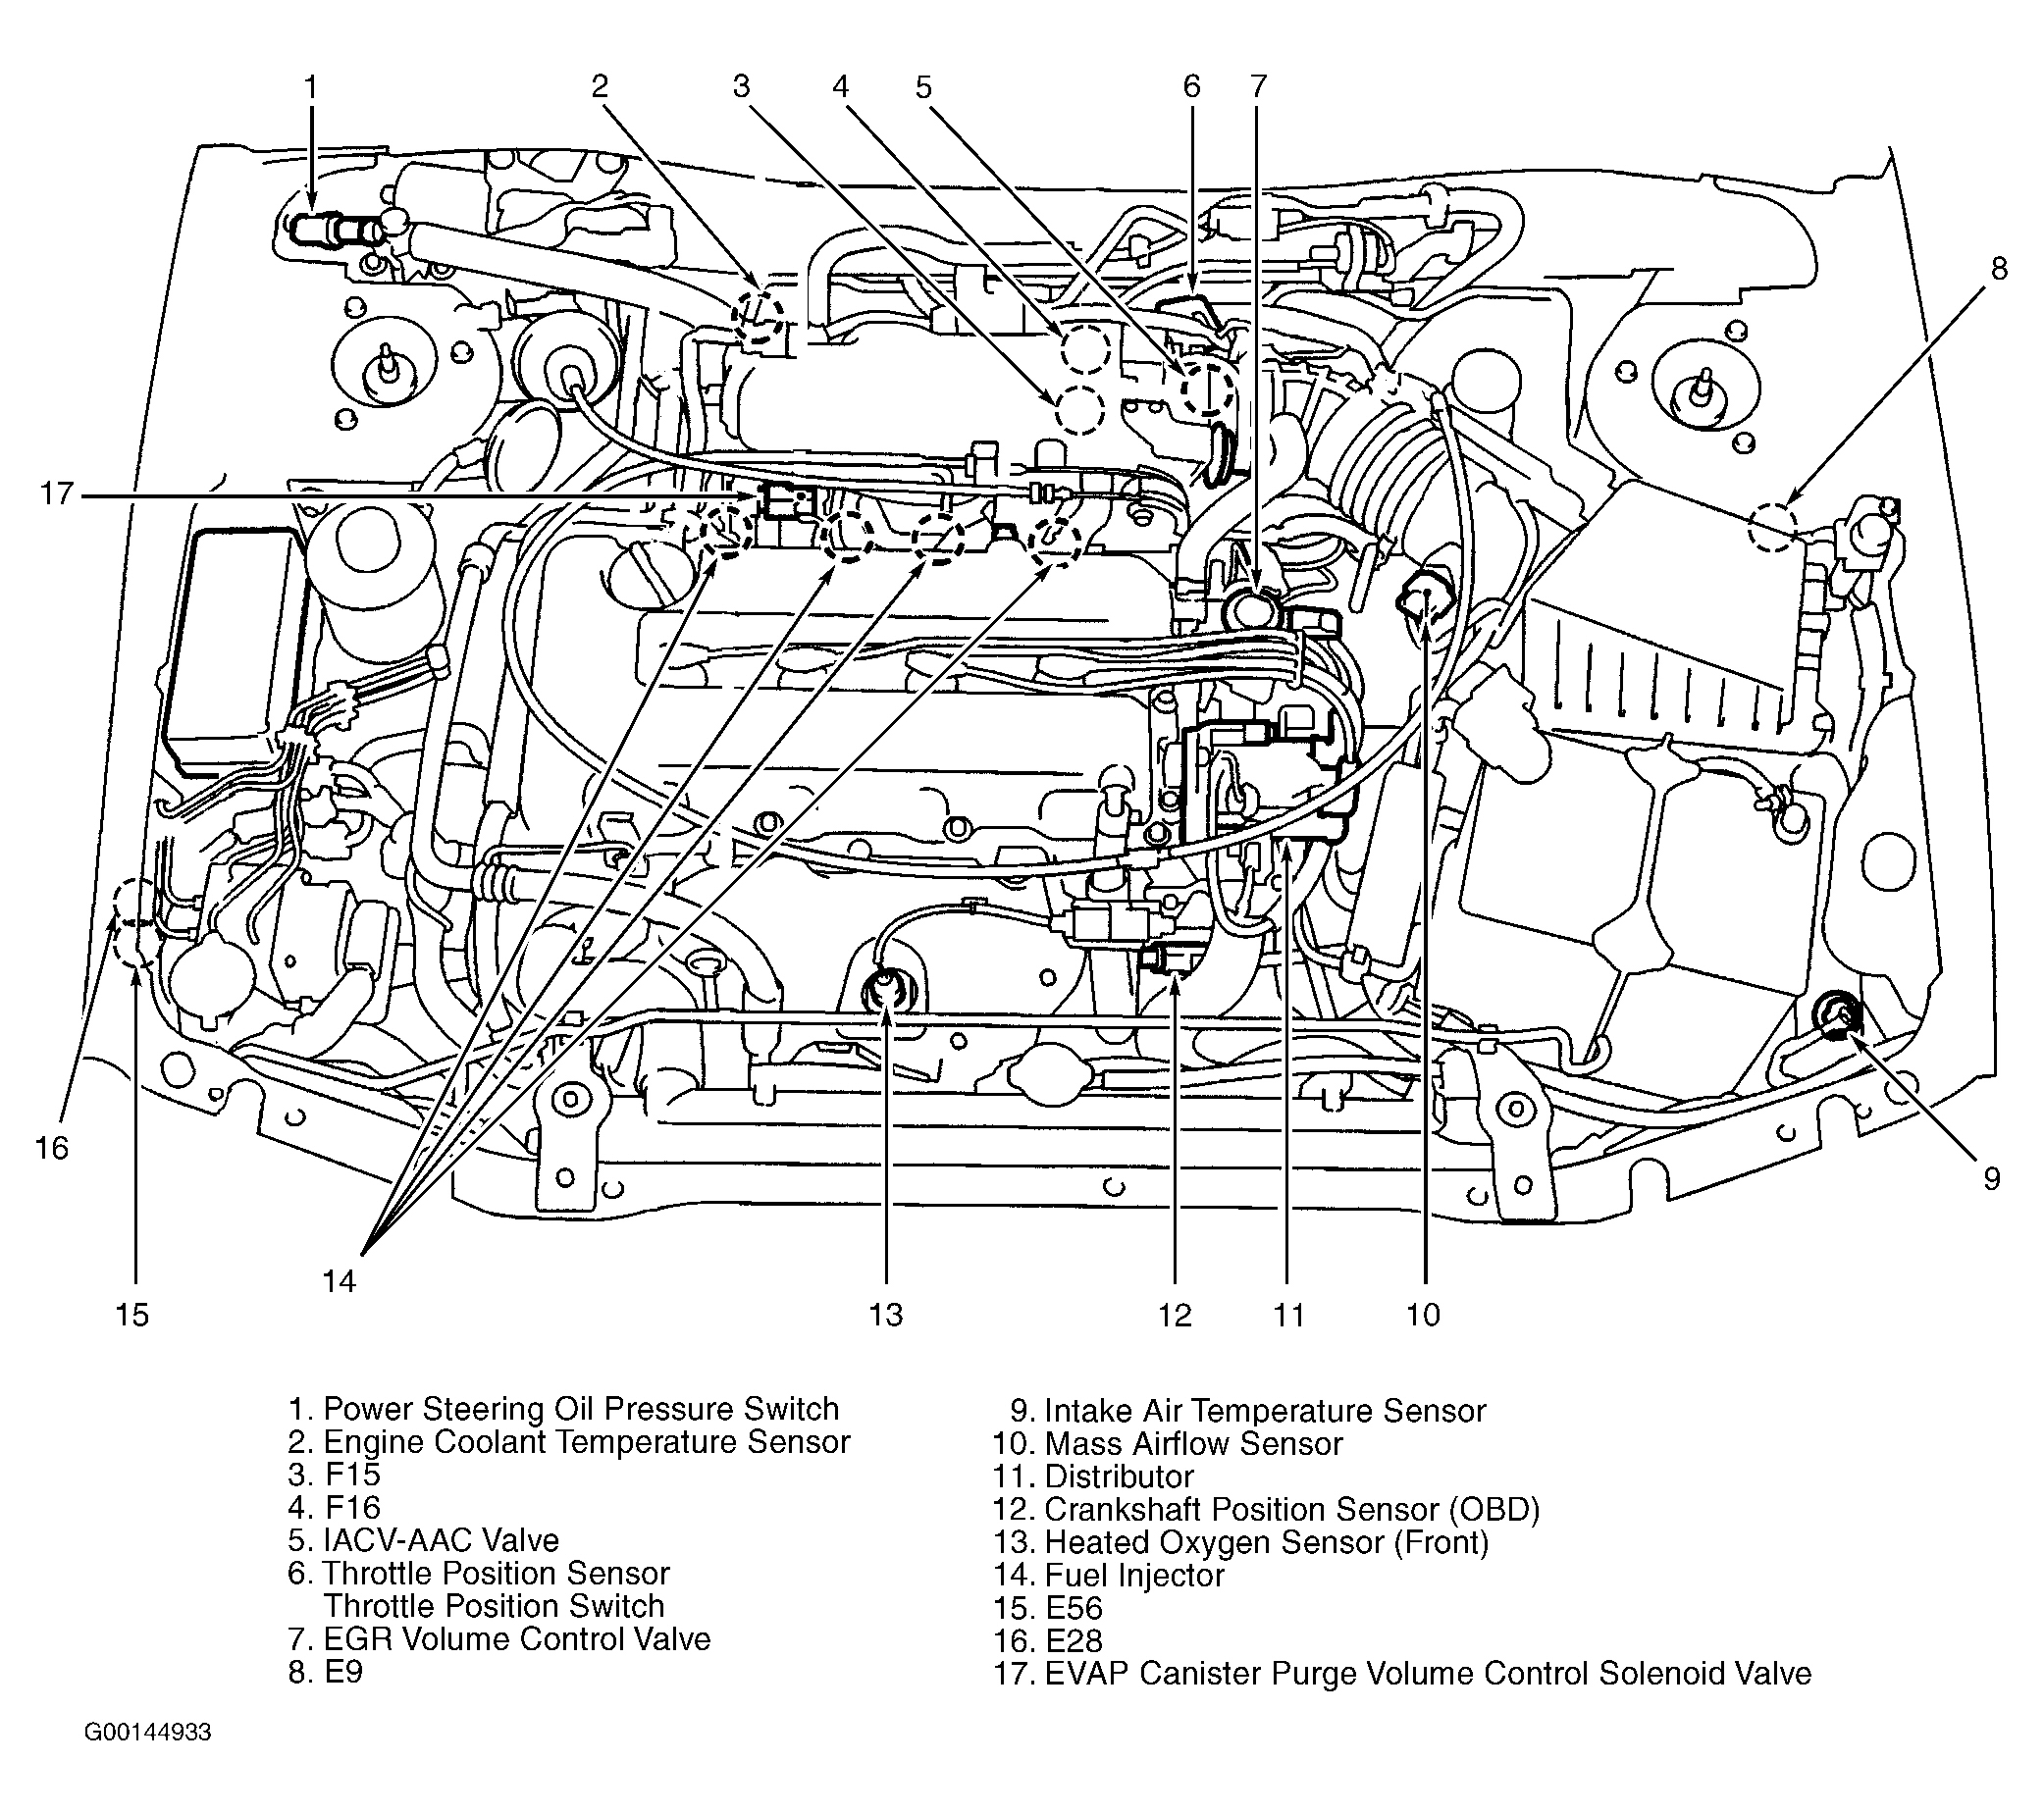 Infiniti G20 2002 - Component Locations -  Engine Compartment